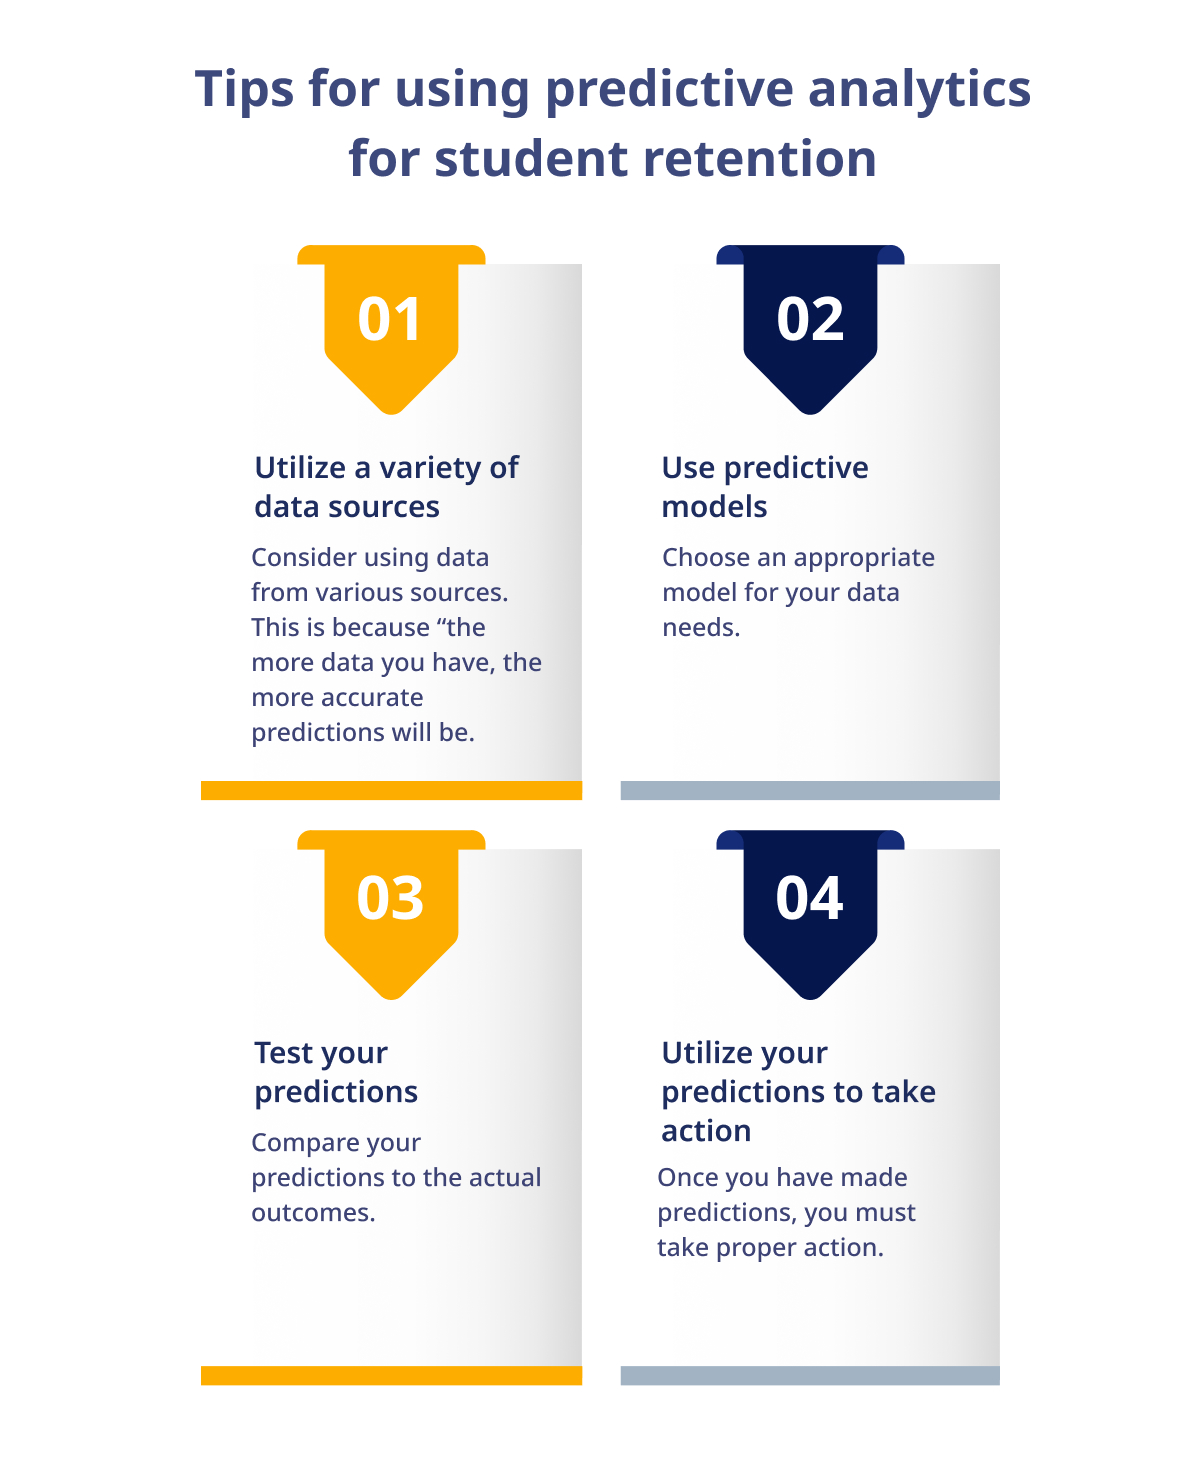 Tips for using predictive analytics for student retention